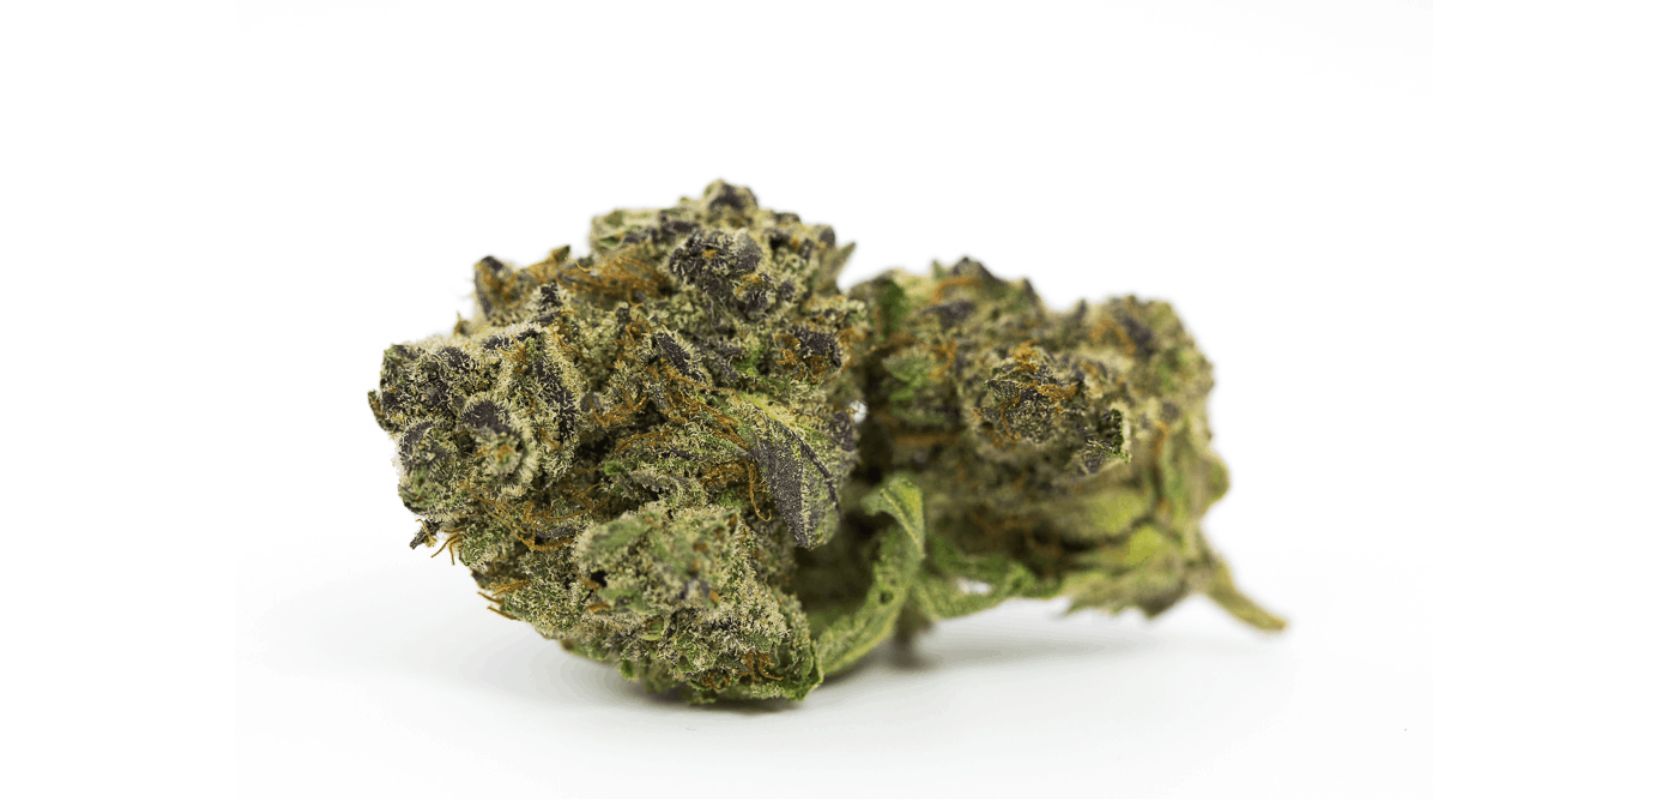 One of the standout terpenes in Ghost Train Haze is terpinolene, which takes the lead in its unique blend. 